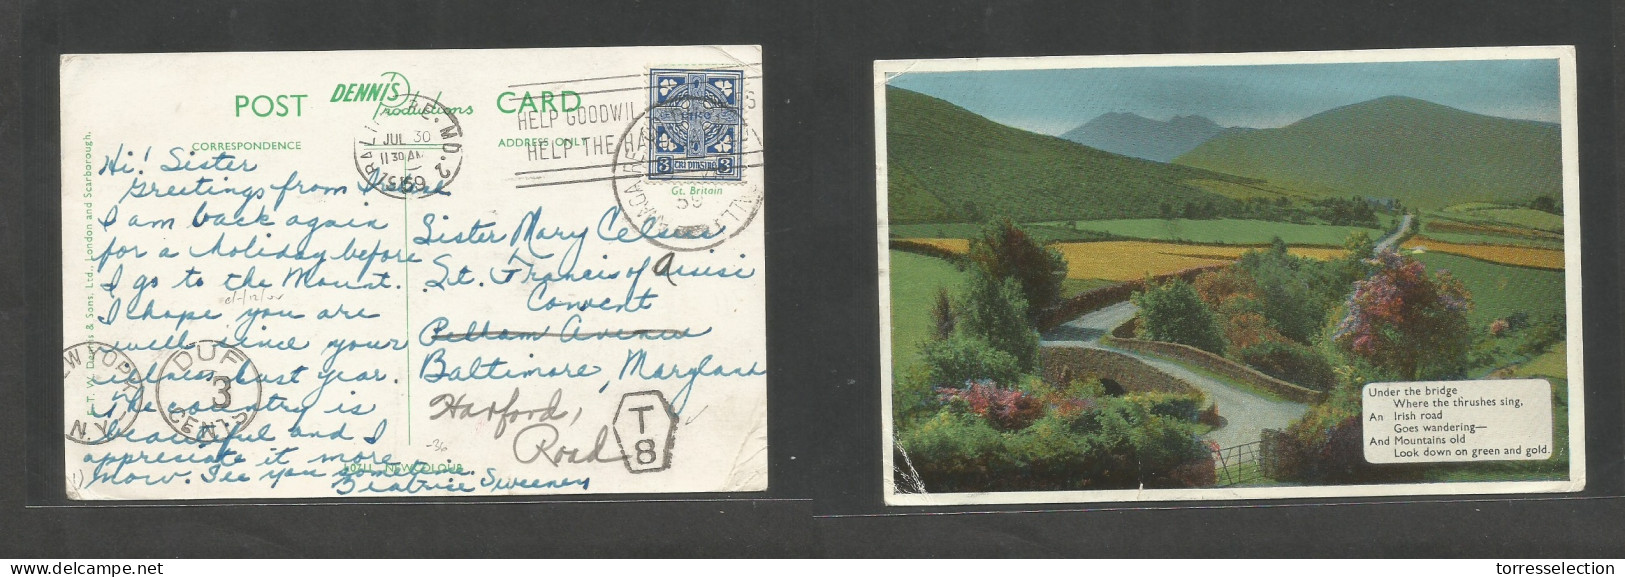 EIRE. 1959. Color Fkd Ppc. Amagare - USA, Baltimore (30 July) Via NYC, Taxed, Due Irish "T8" Scarce Cachet. Fine. - Gebraucht